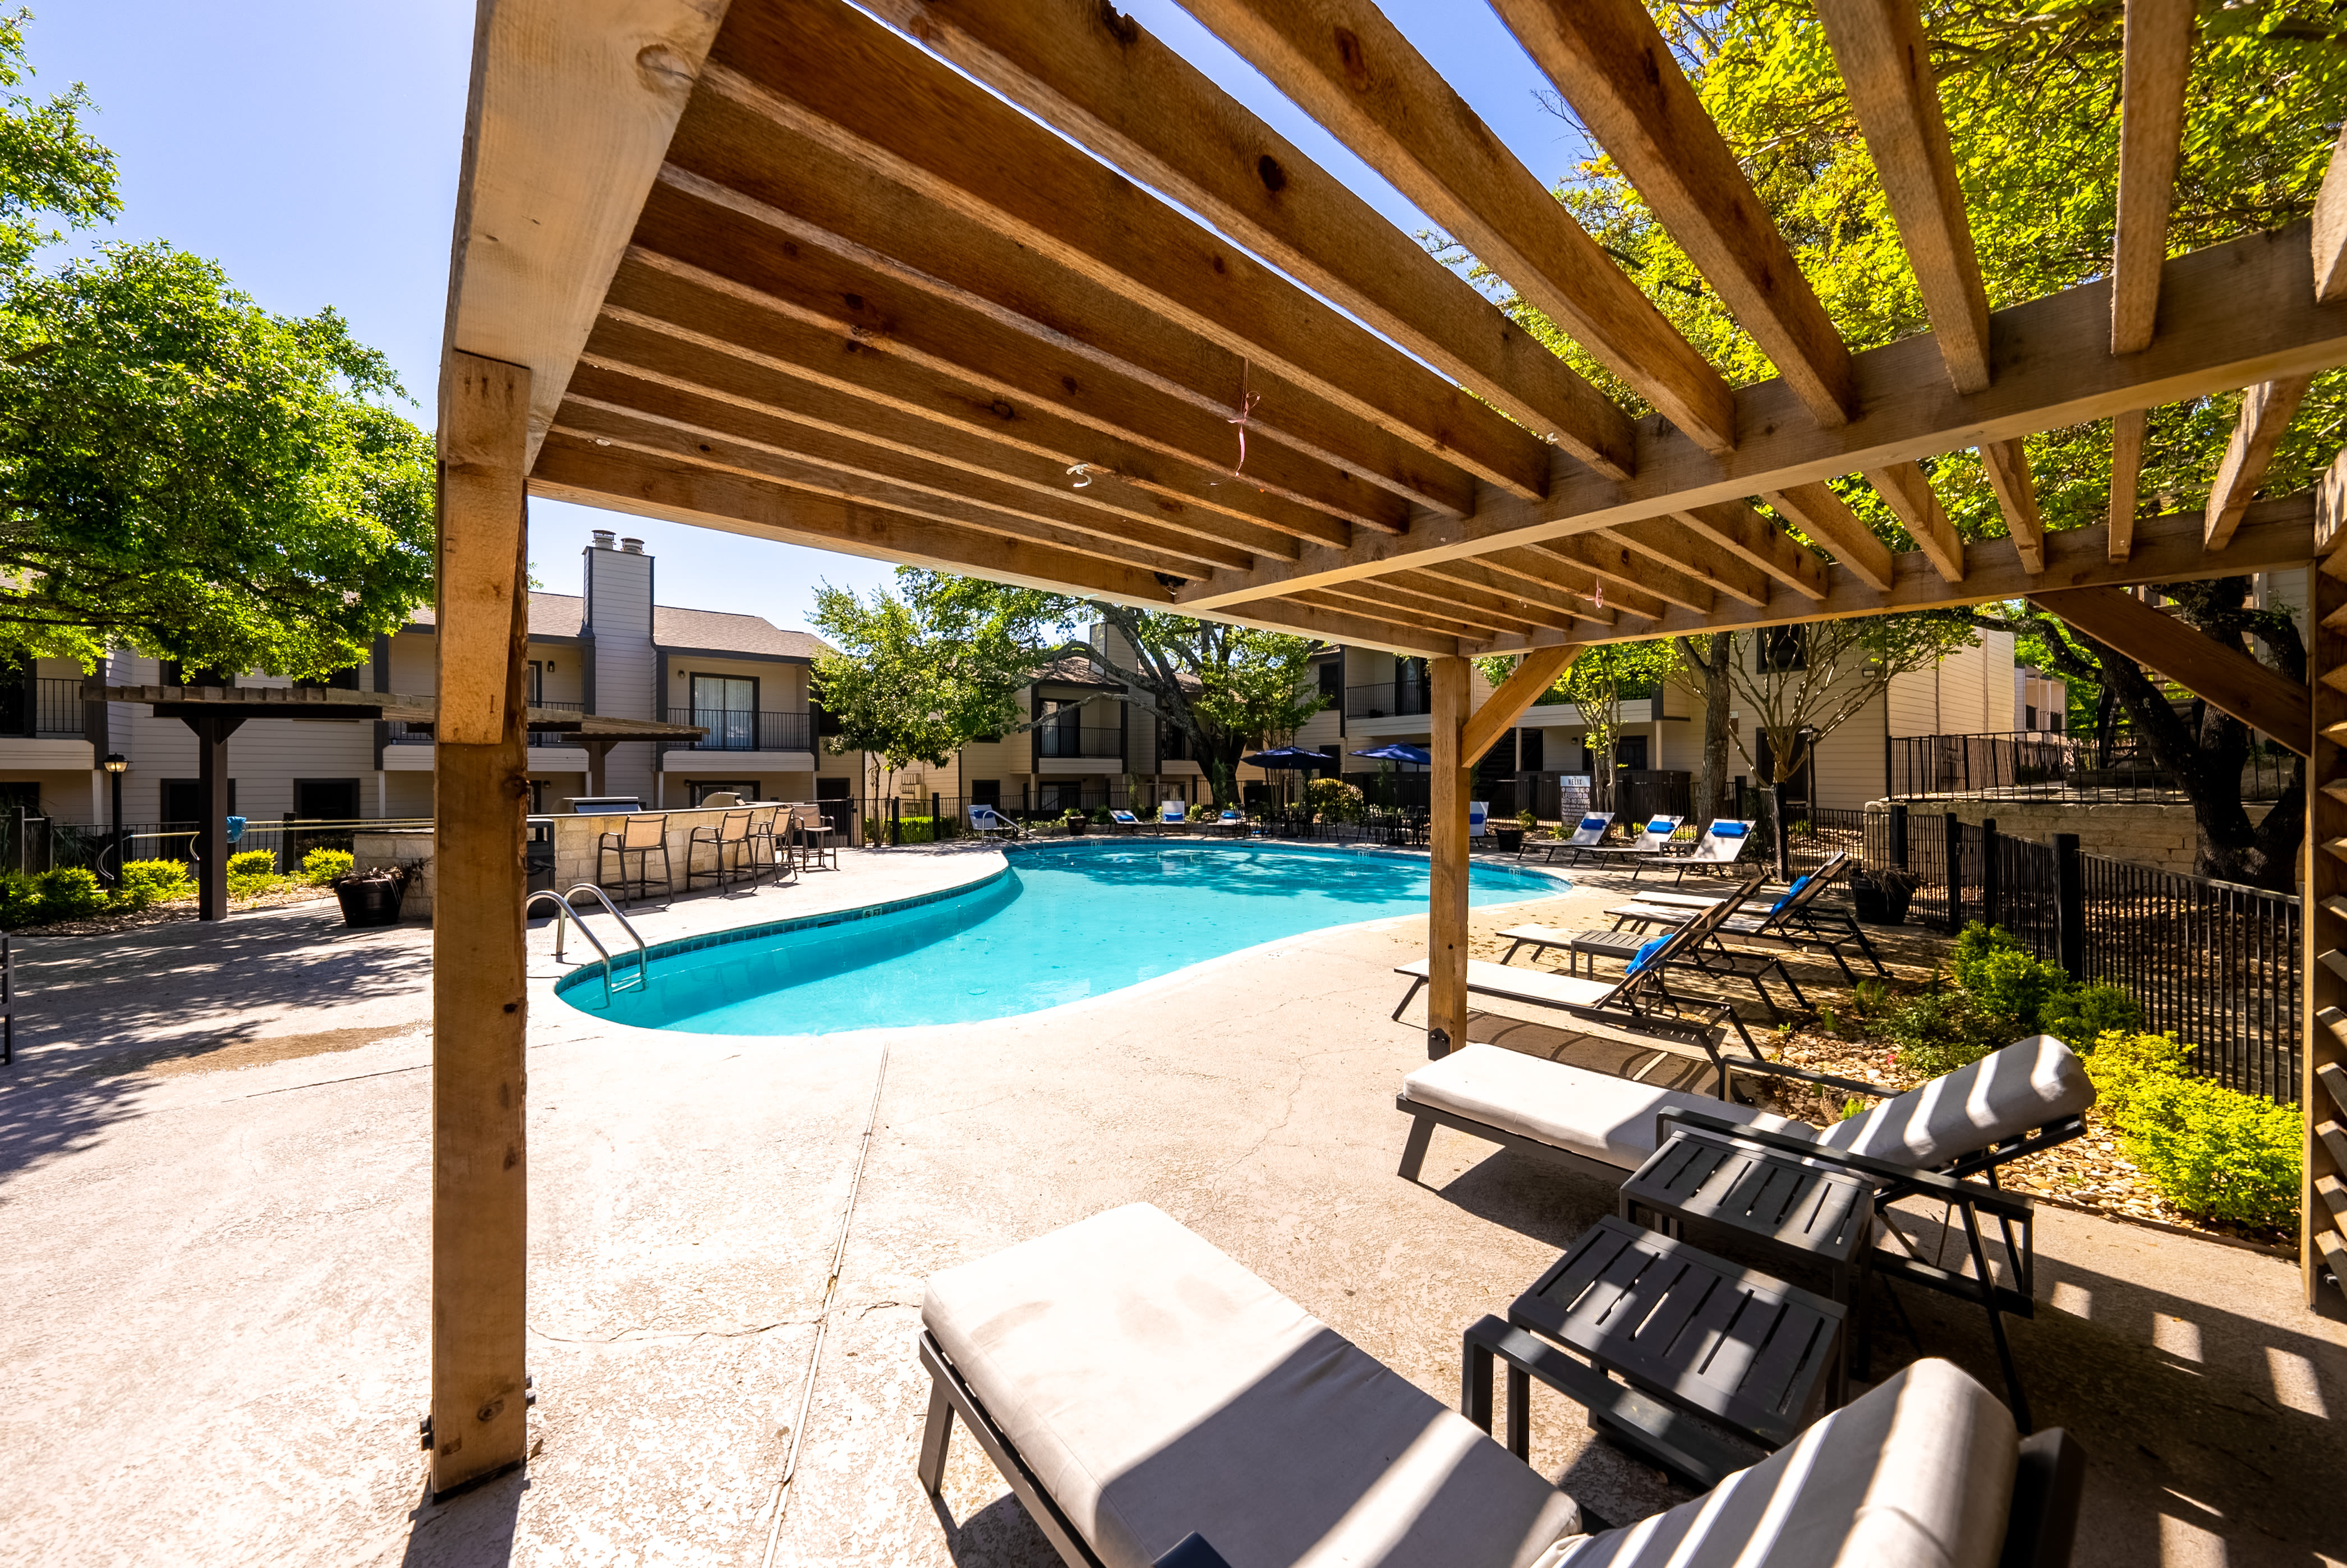 View amenities at The Helix in San Antonio, Texas